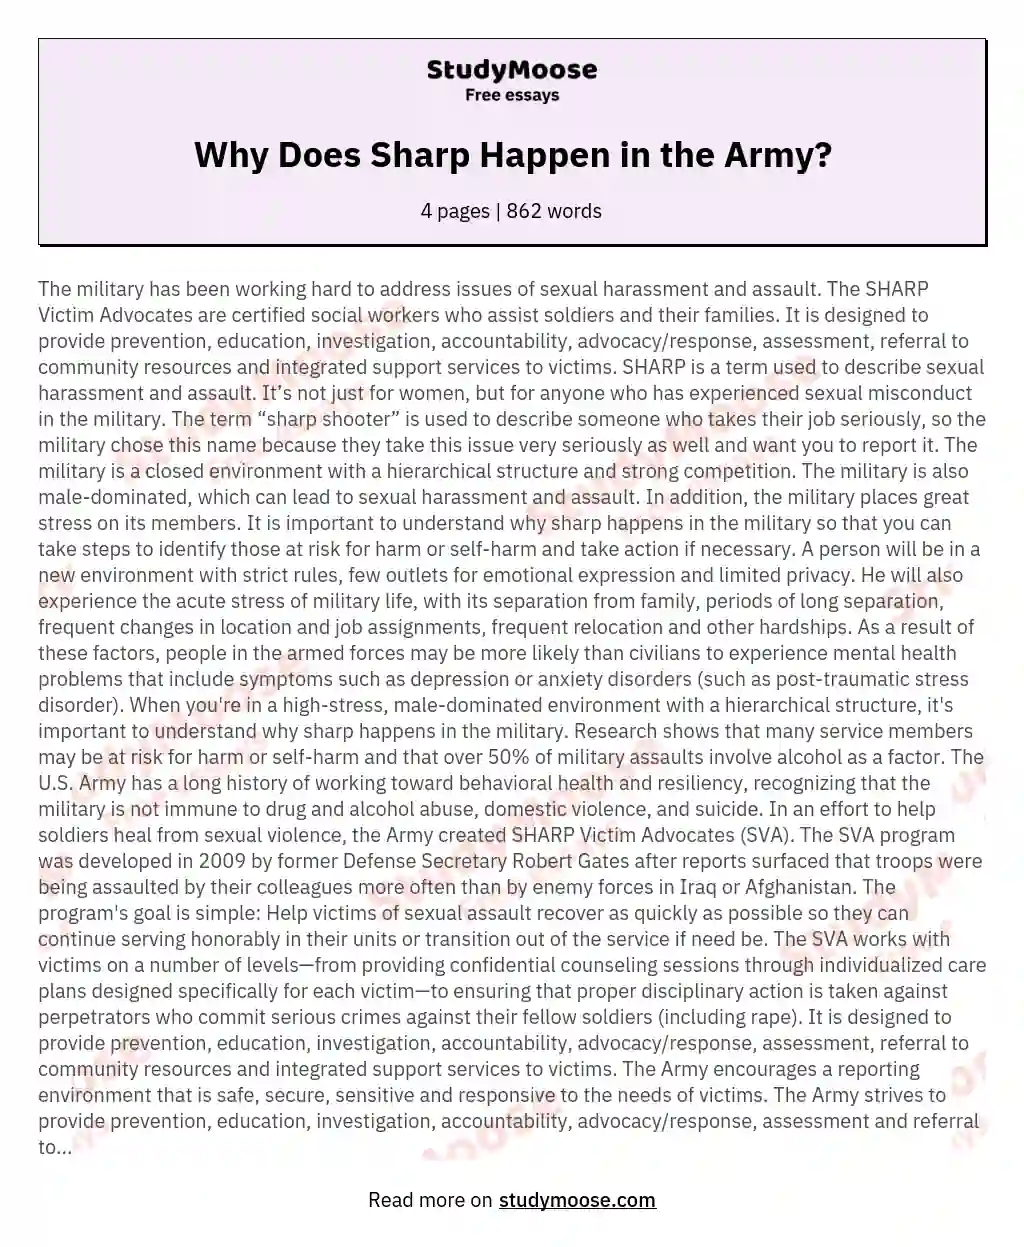 Why Does Sharp Happen in the Army? essay